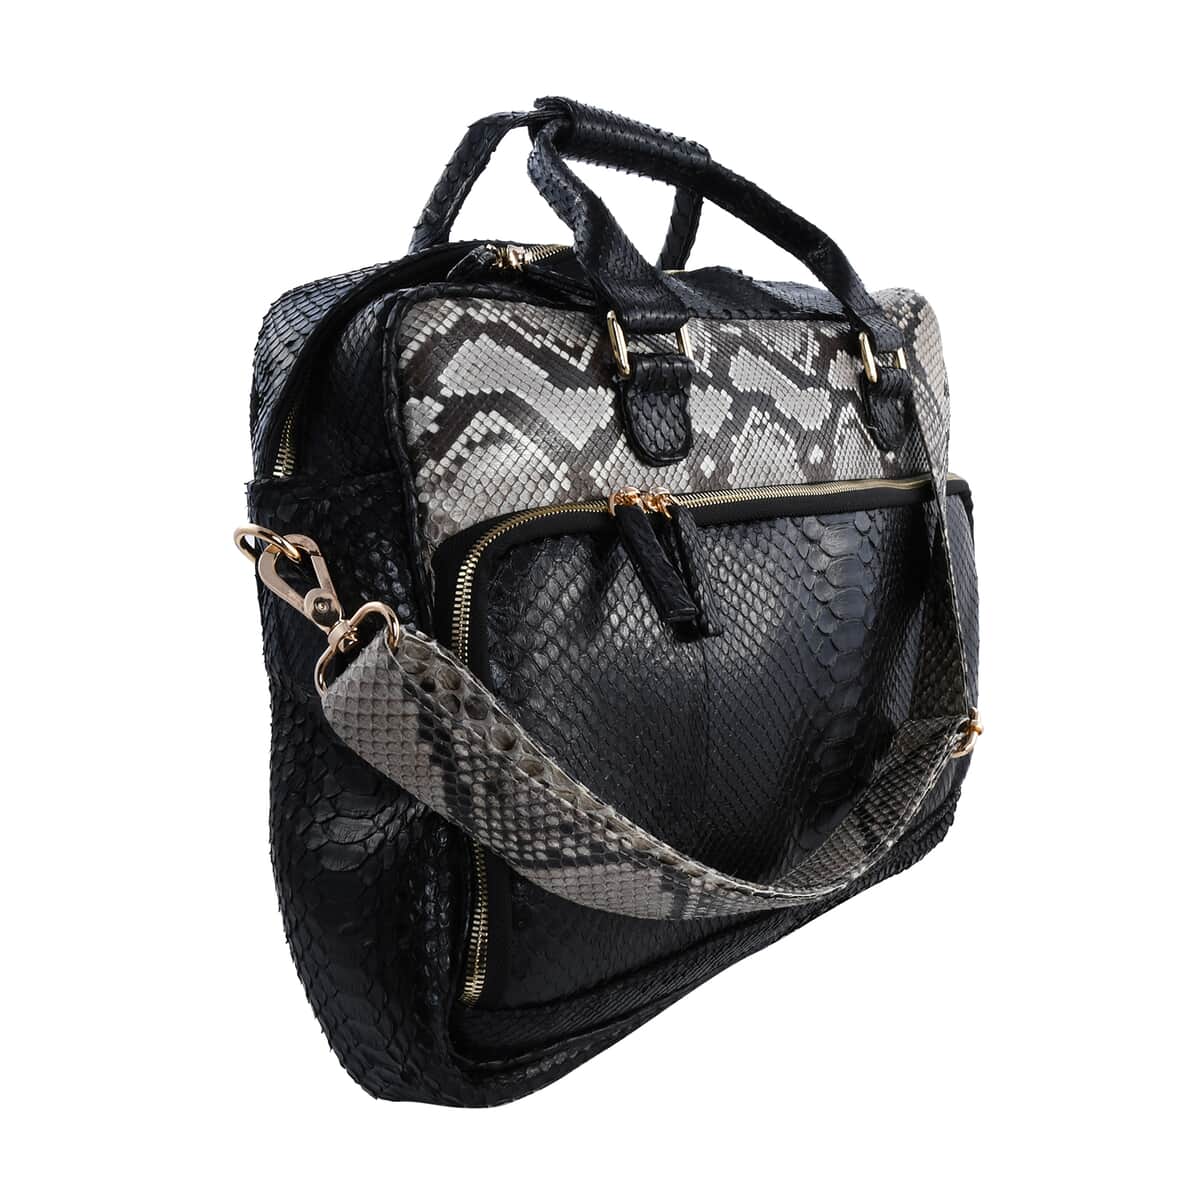 The Pelle Python Collection Handmade 100% Genuine Python Leather Black with Natural Color Laptop Bag (15.5"x12"x3.5") image number 2